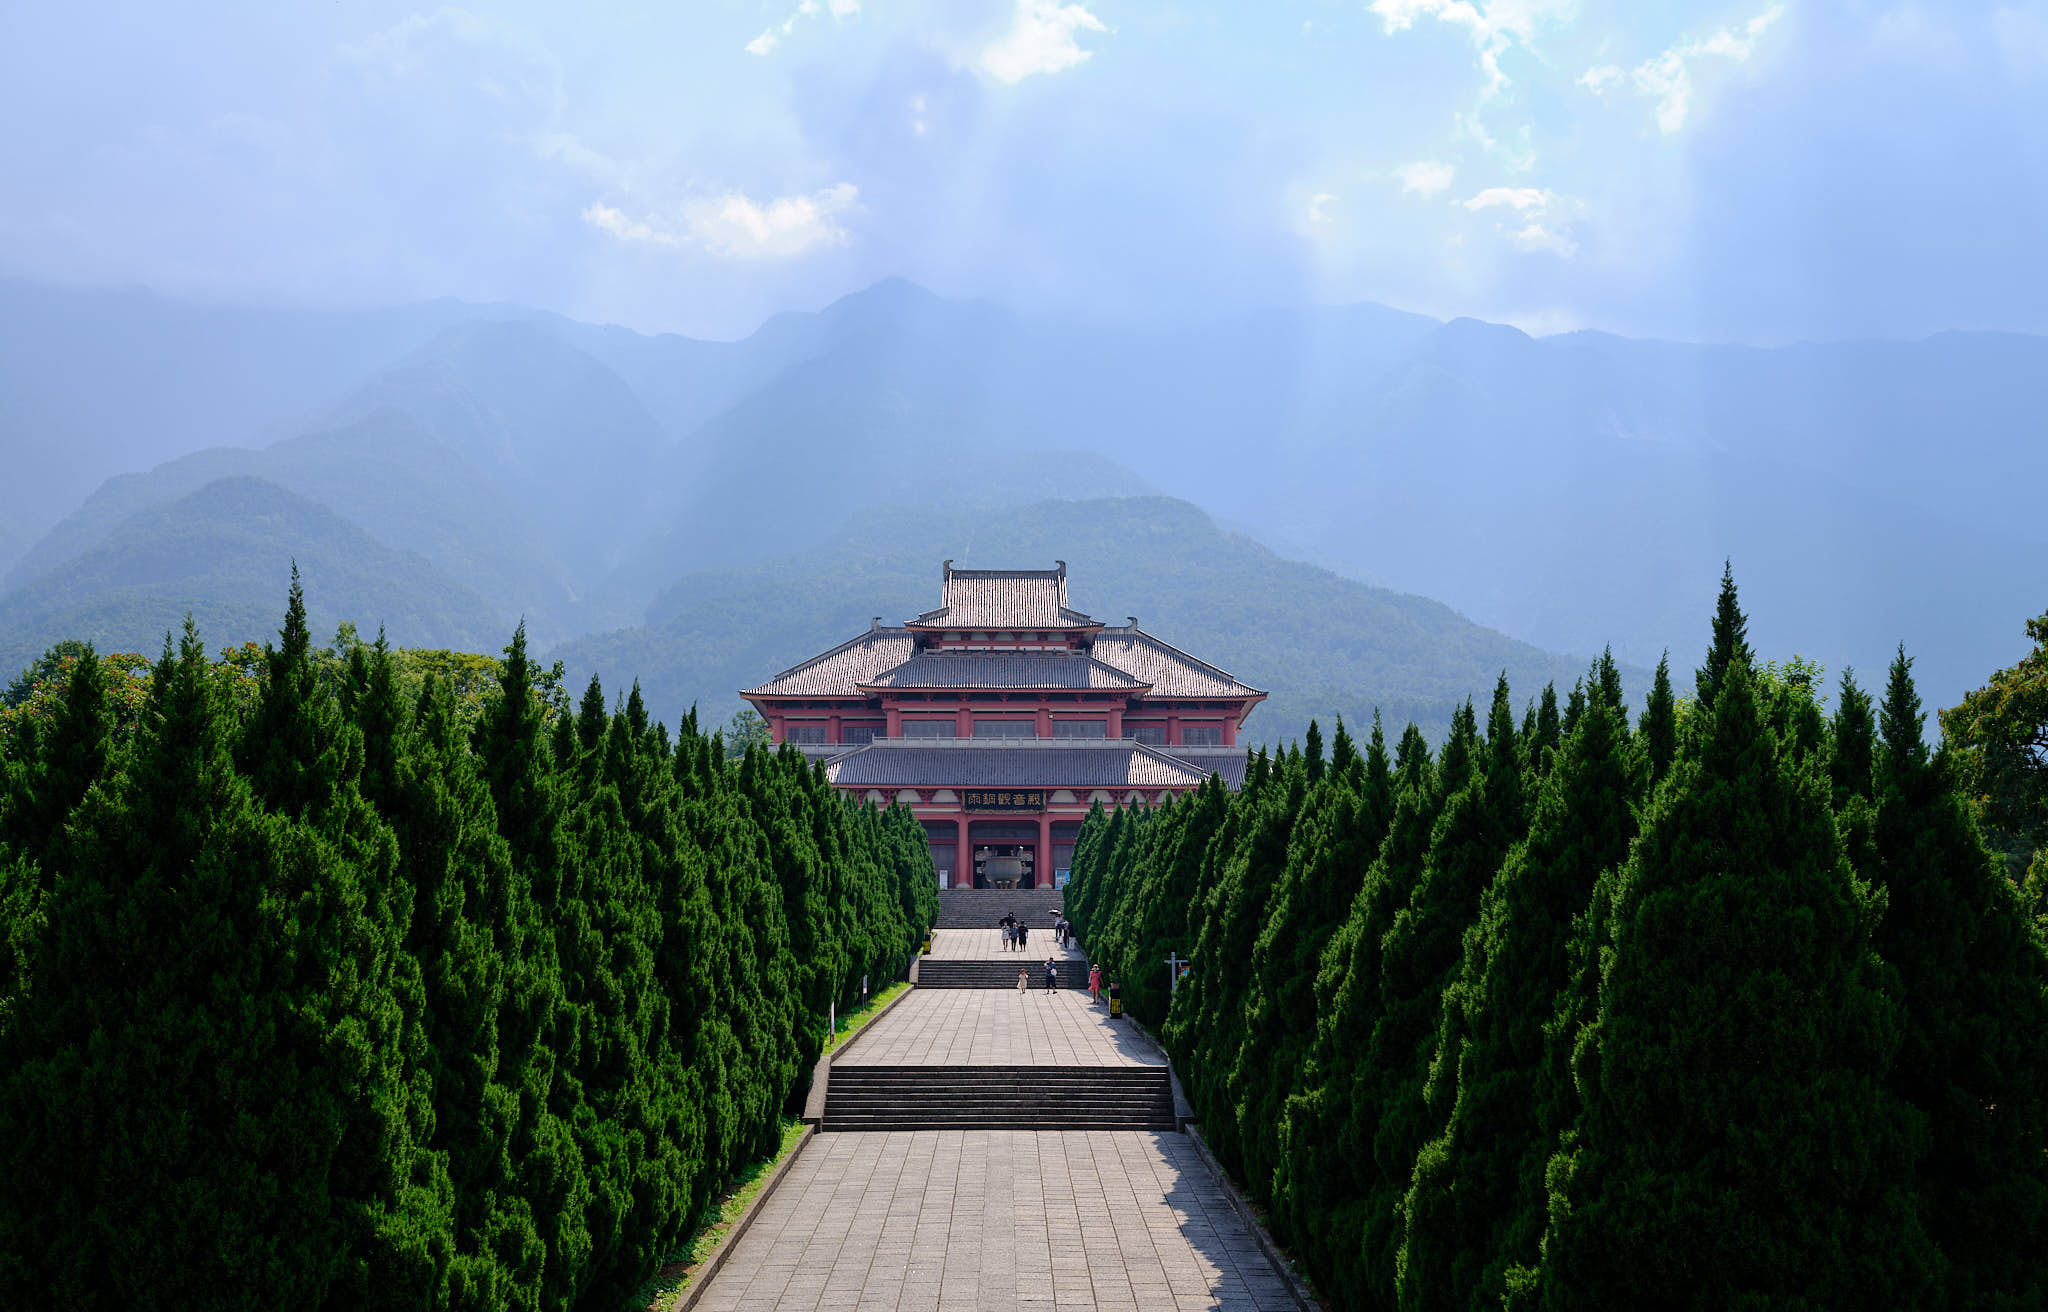 Cangshan Mountain temple with tunnel of trees and mountains in the back